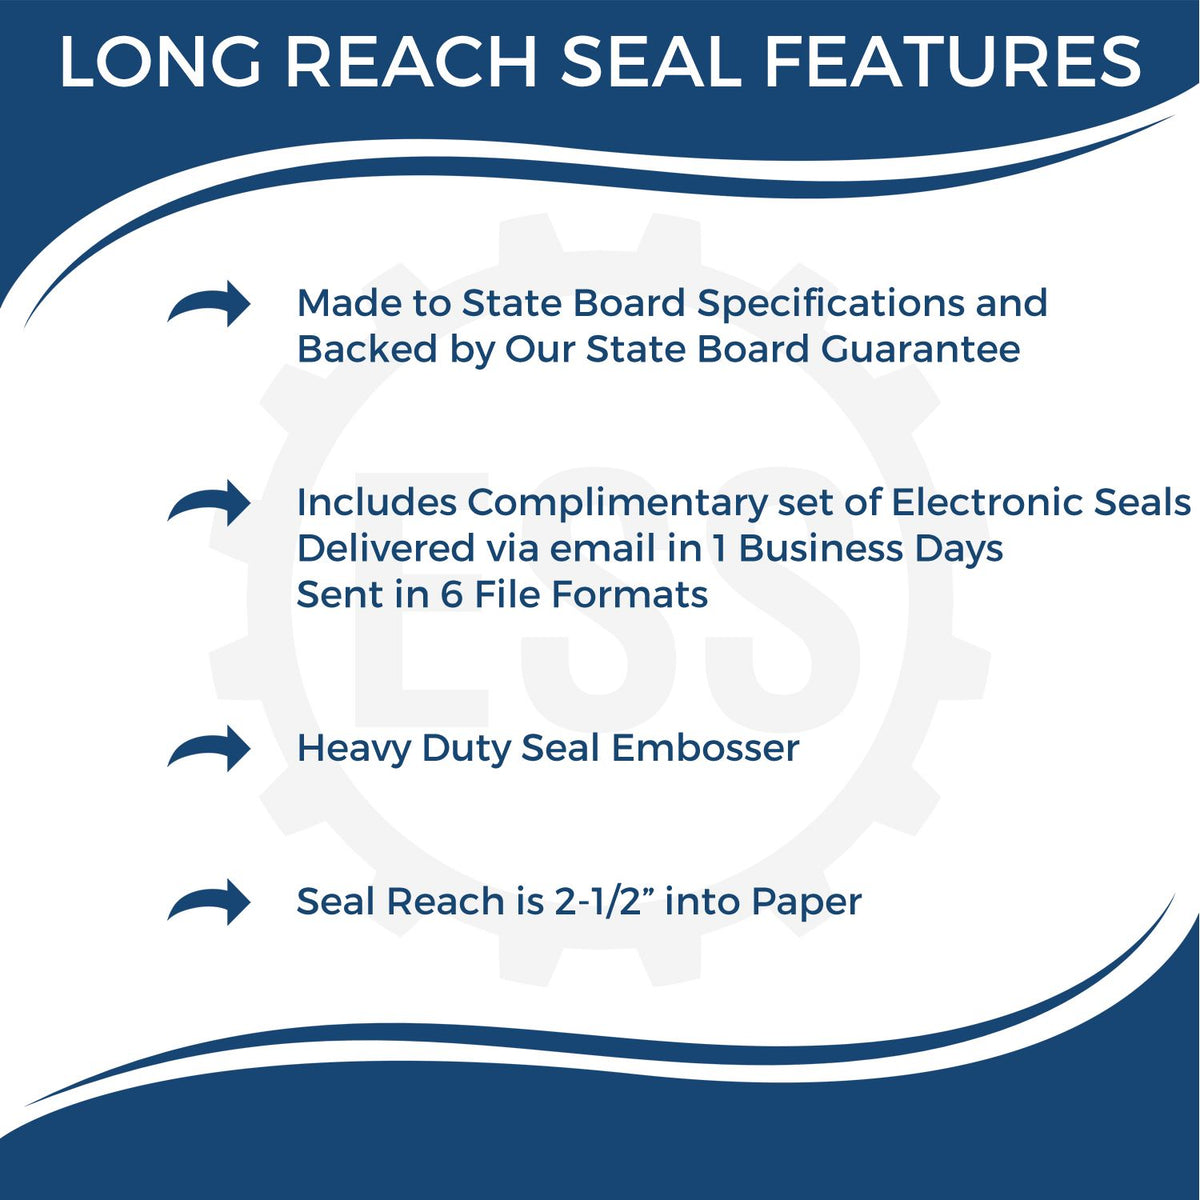 A picture of an infographic highlighting the selling points for the Long Reach Texas Geology Seal